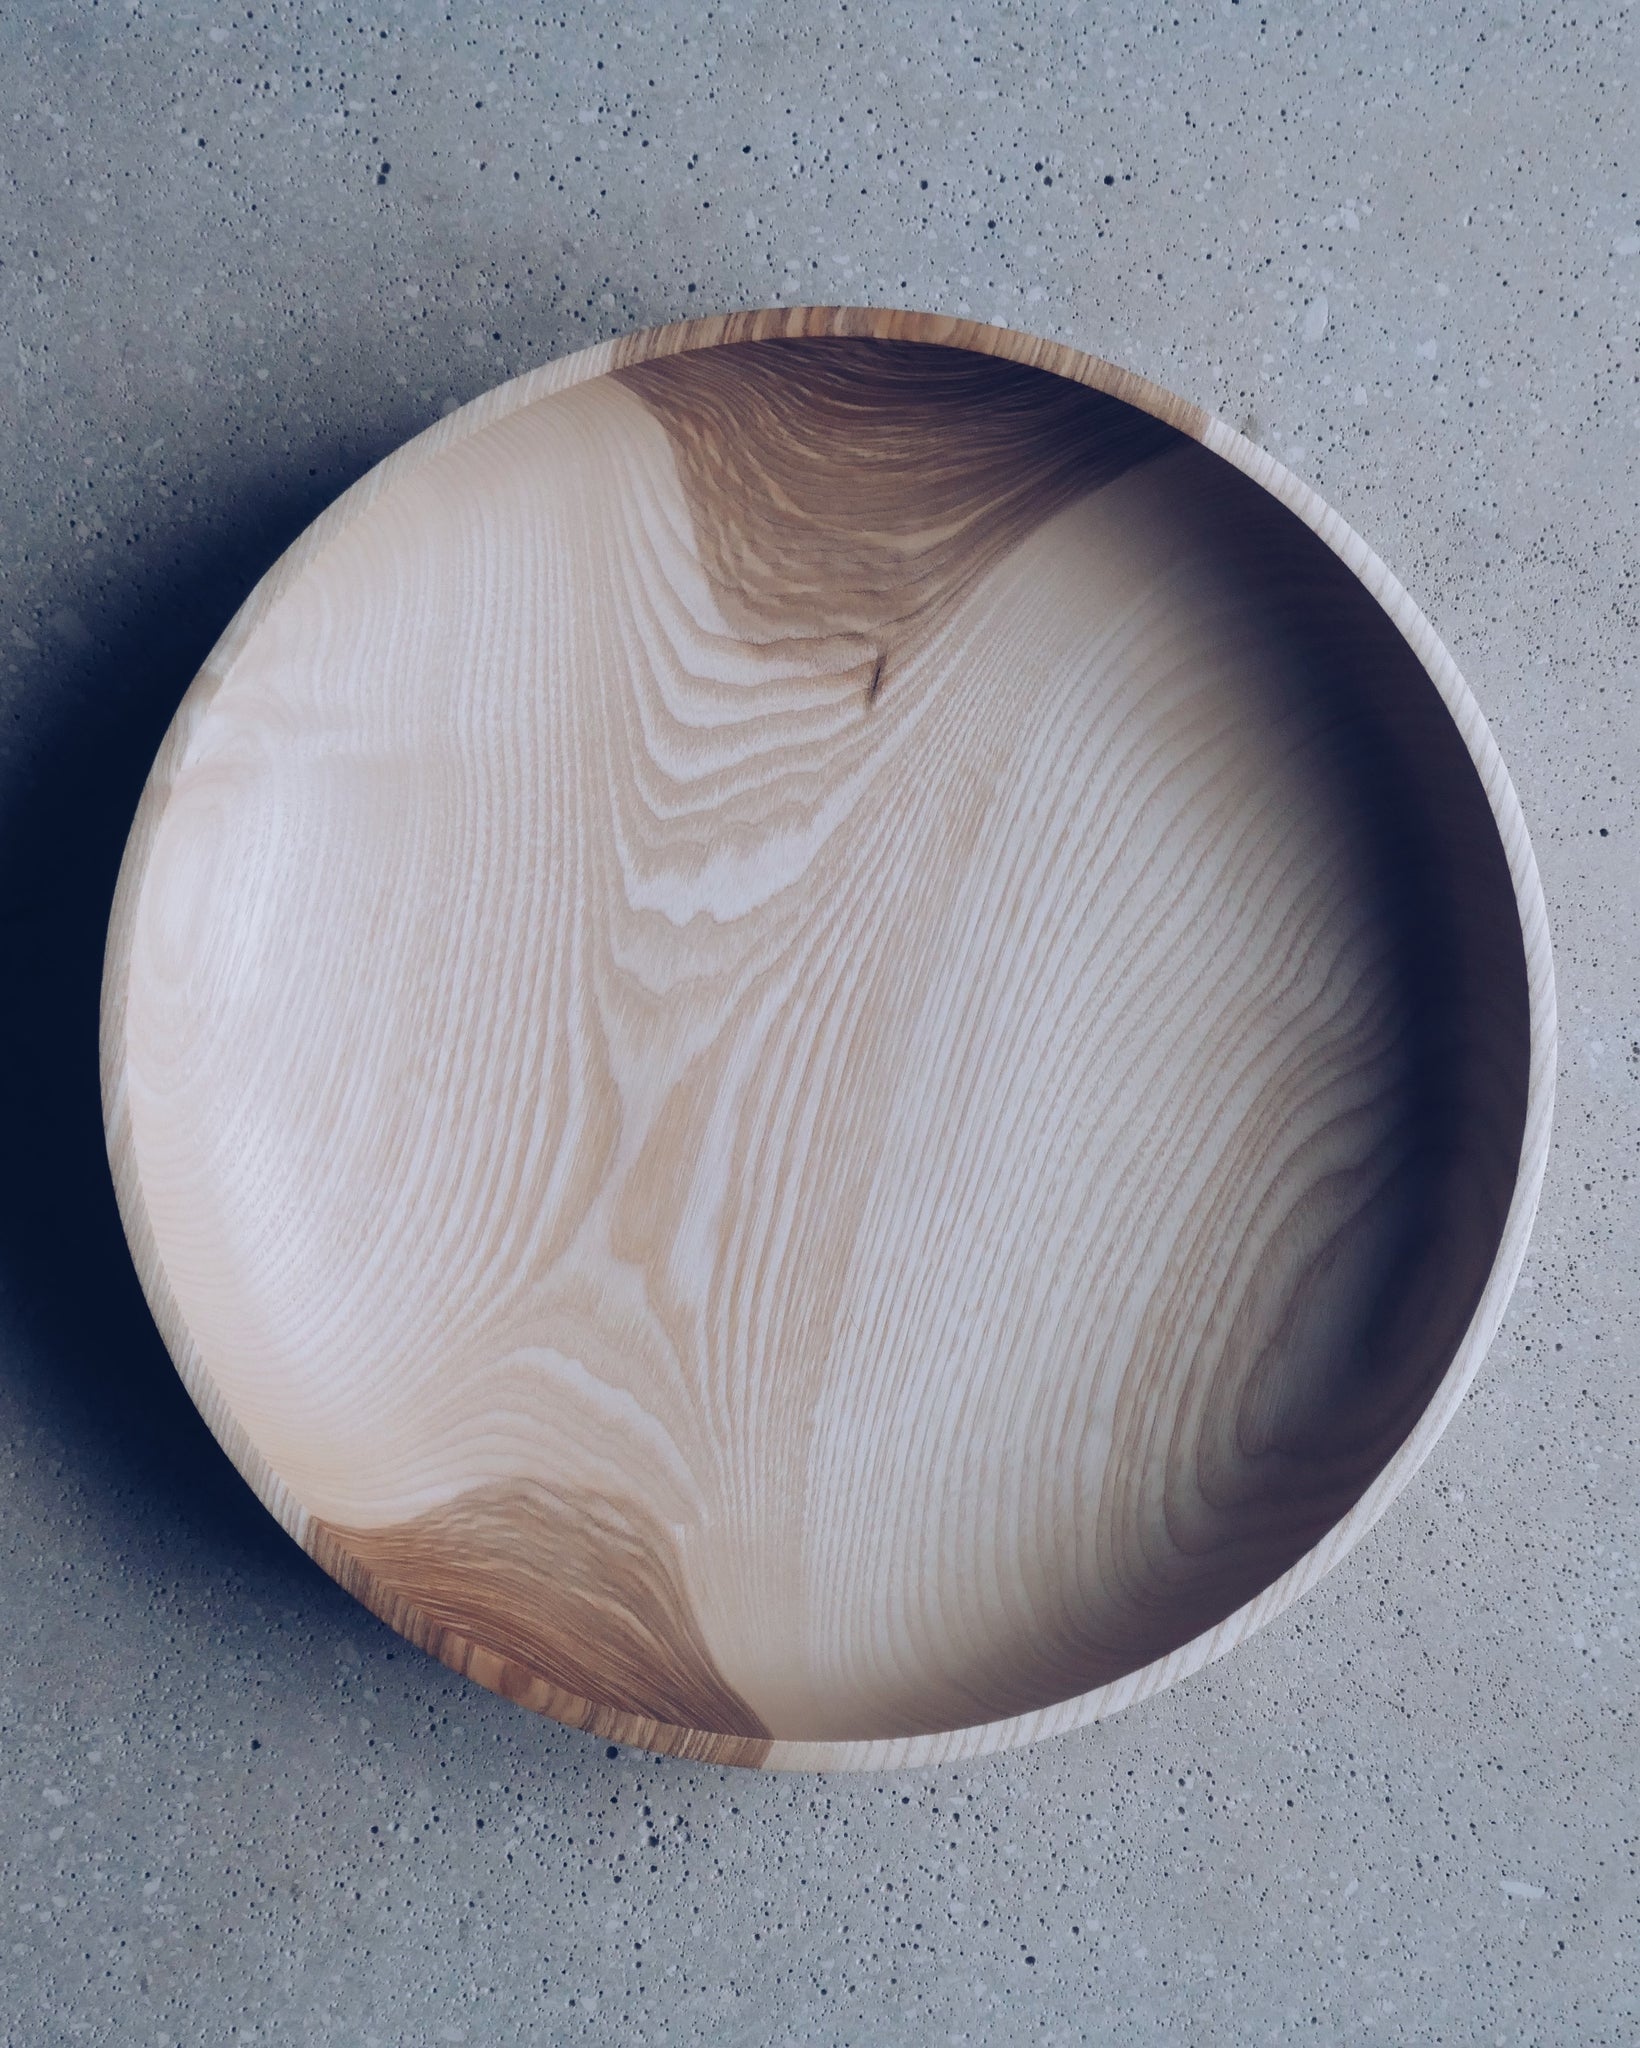 XL Bowl - in Olive Ash